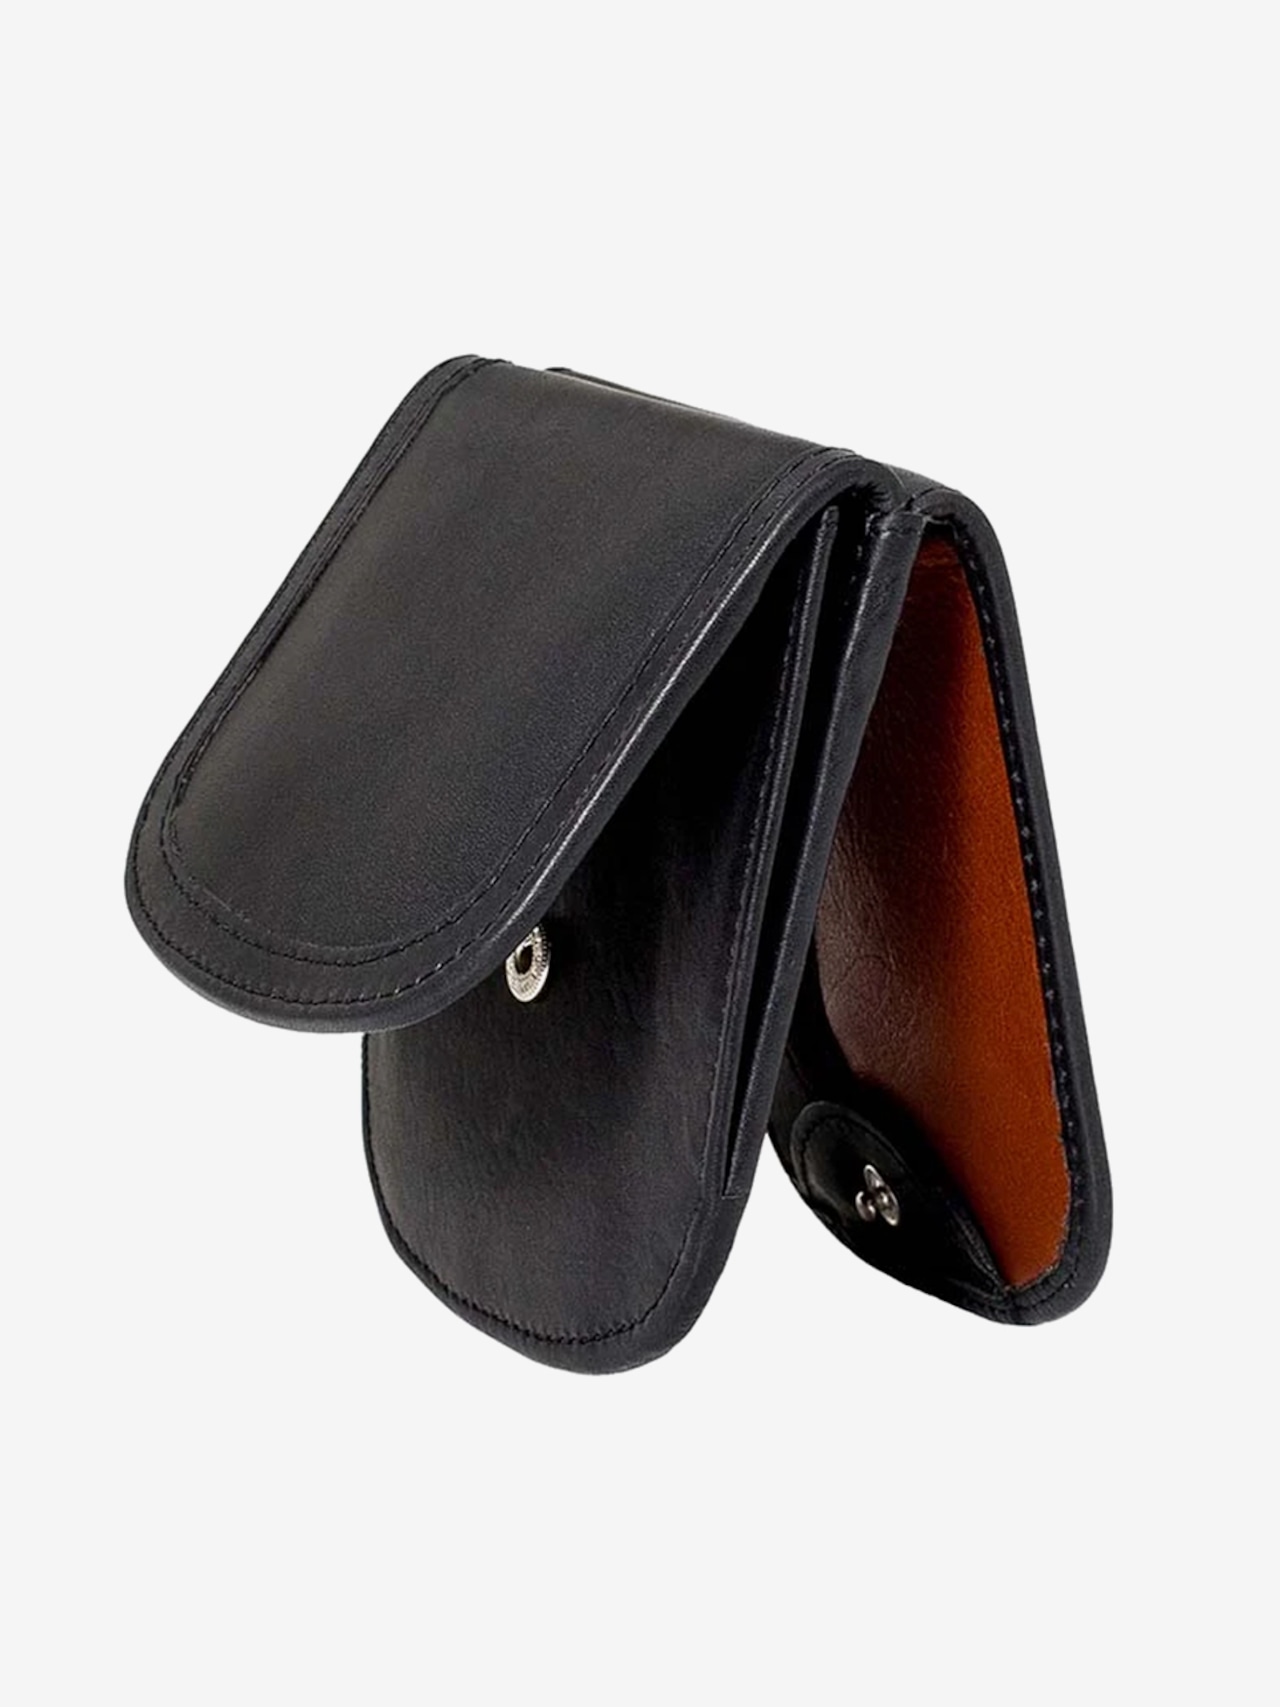 TAXI WALLET「The Saddle Black Brown（コンパクト 財布）」